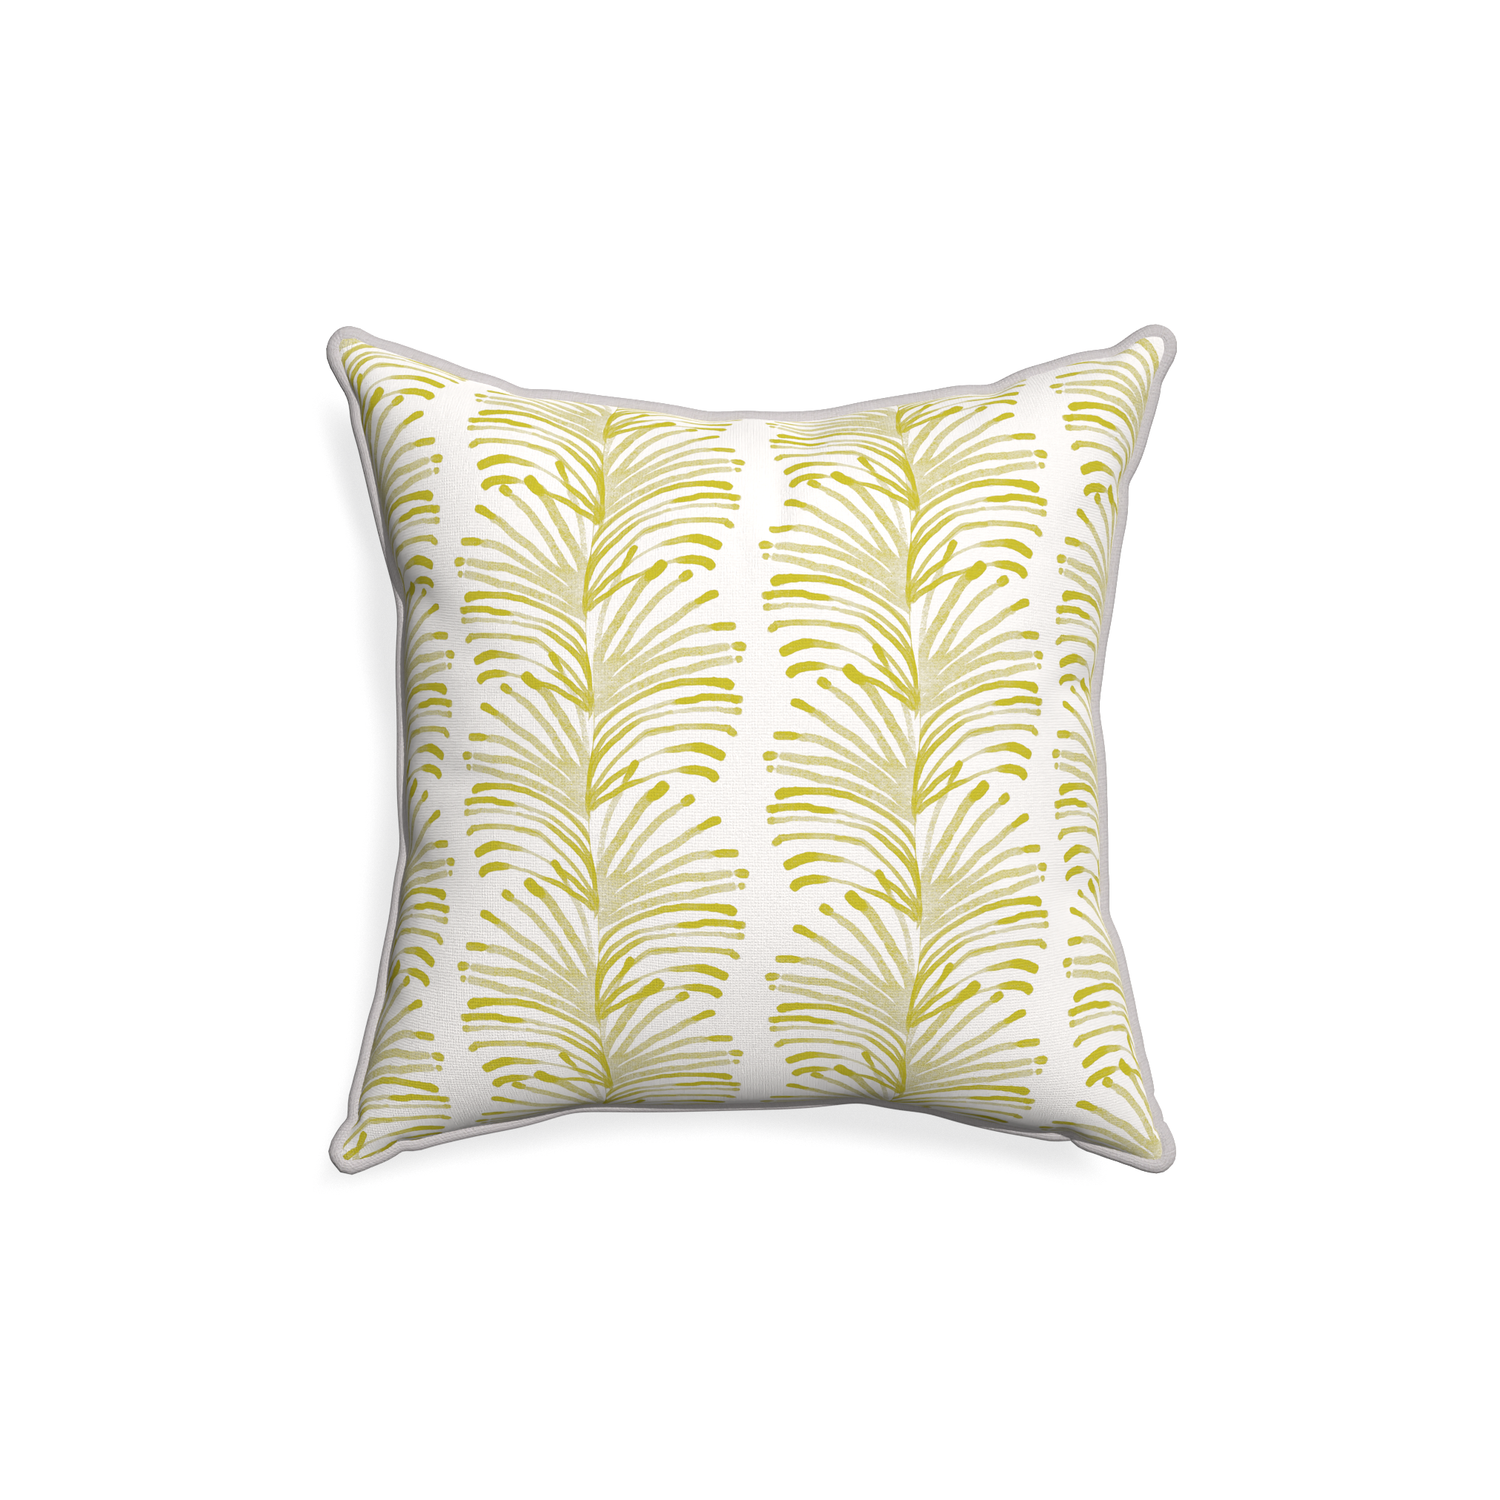 18-square emma chartreuse custom yellow stripe chartreusepillow with pebble piping on white background